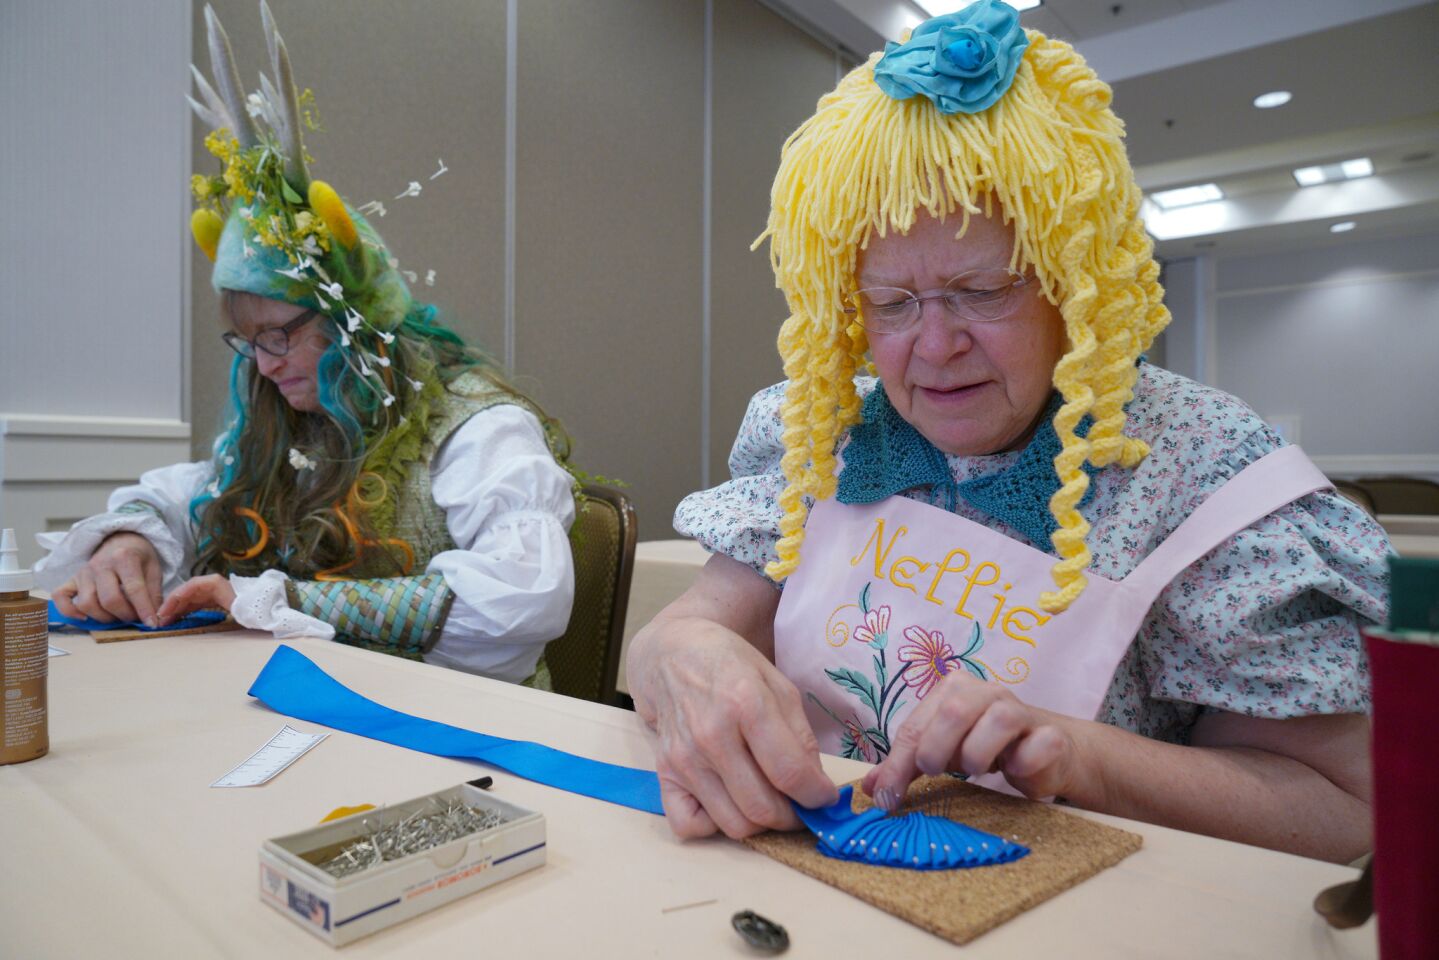 Karen Wallach (left) dressed as the Woodland Wanderer and Susan Farnham dressed as Nellie Oleson learn to sew a ribbon cockades at the costume workshop during Costume-Con this past weekend in Mission Valley.